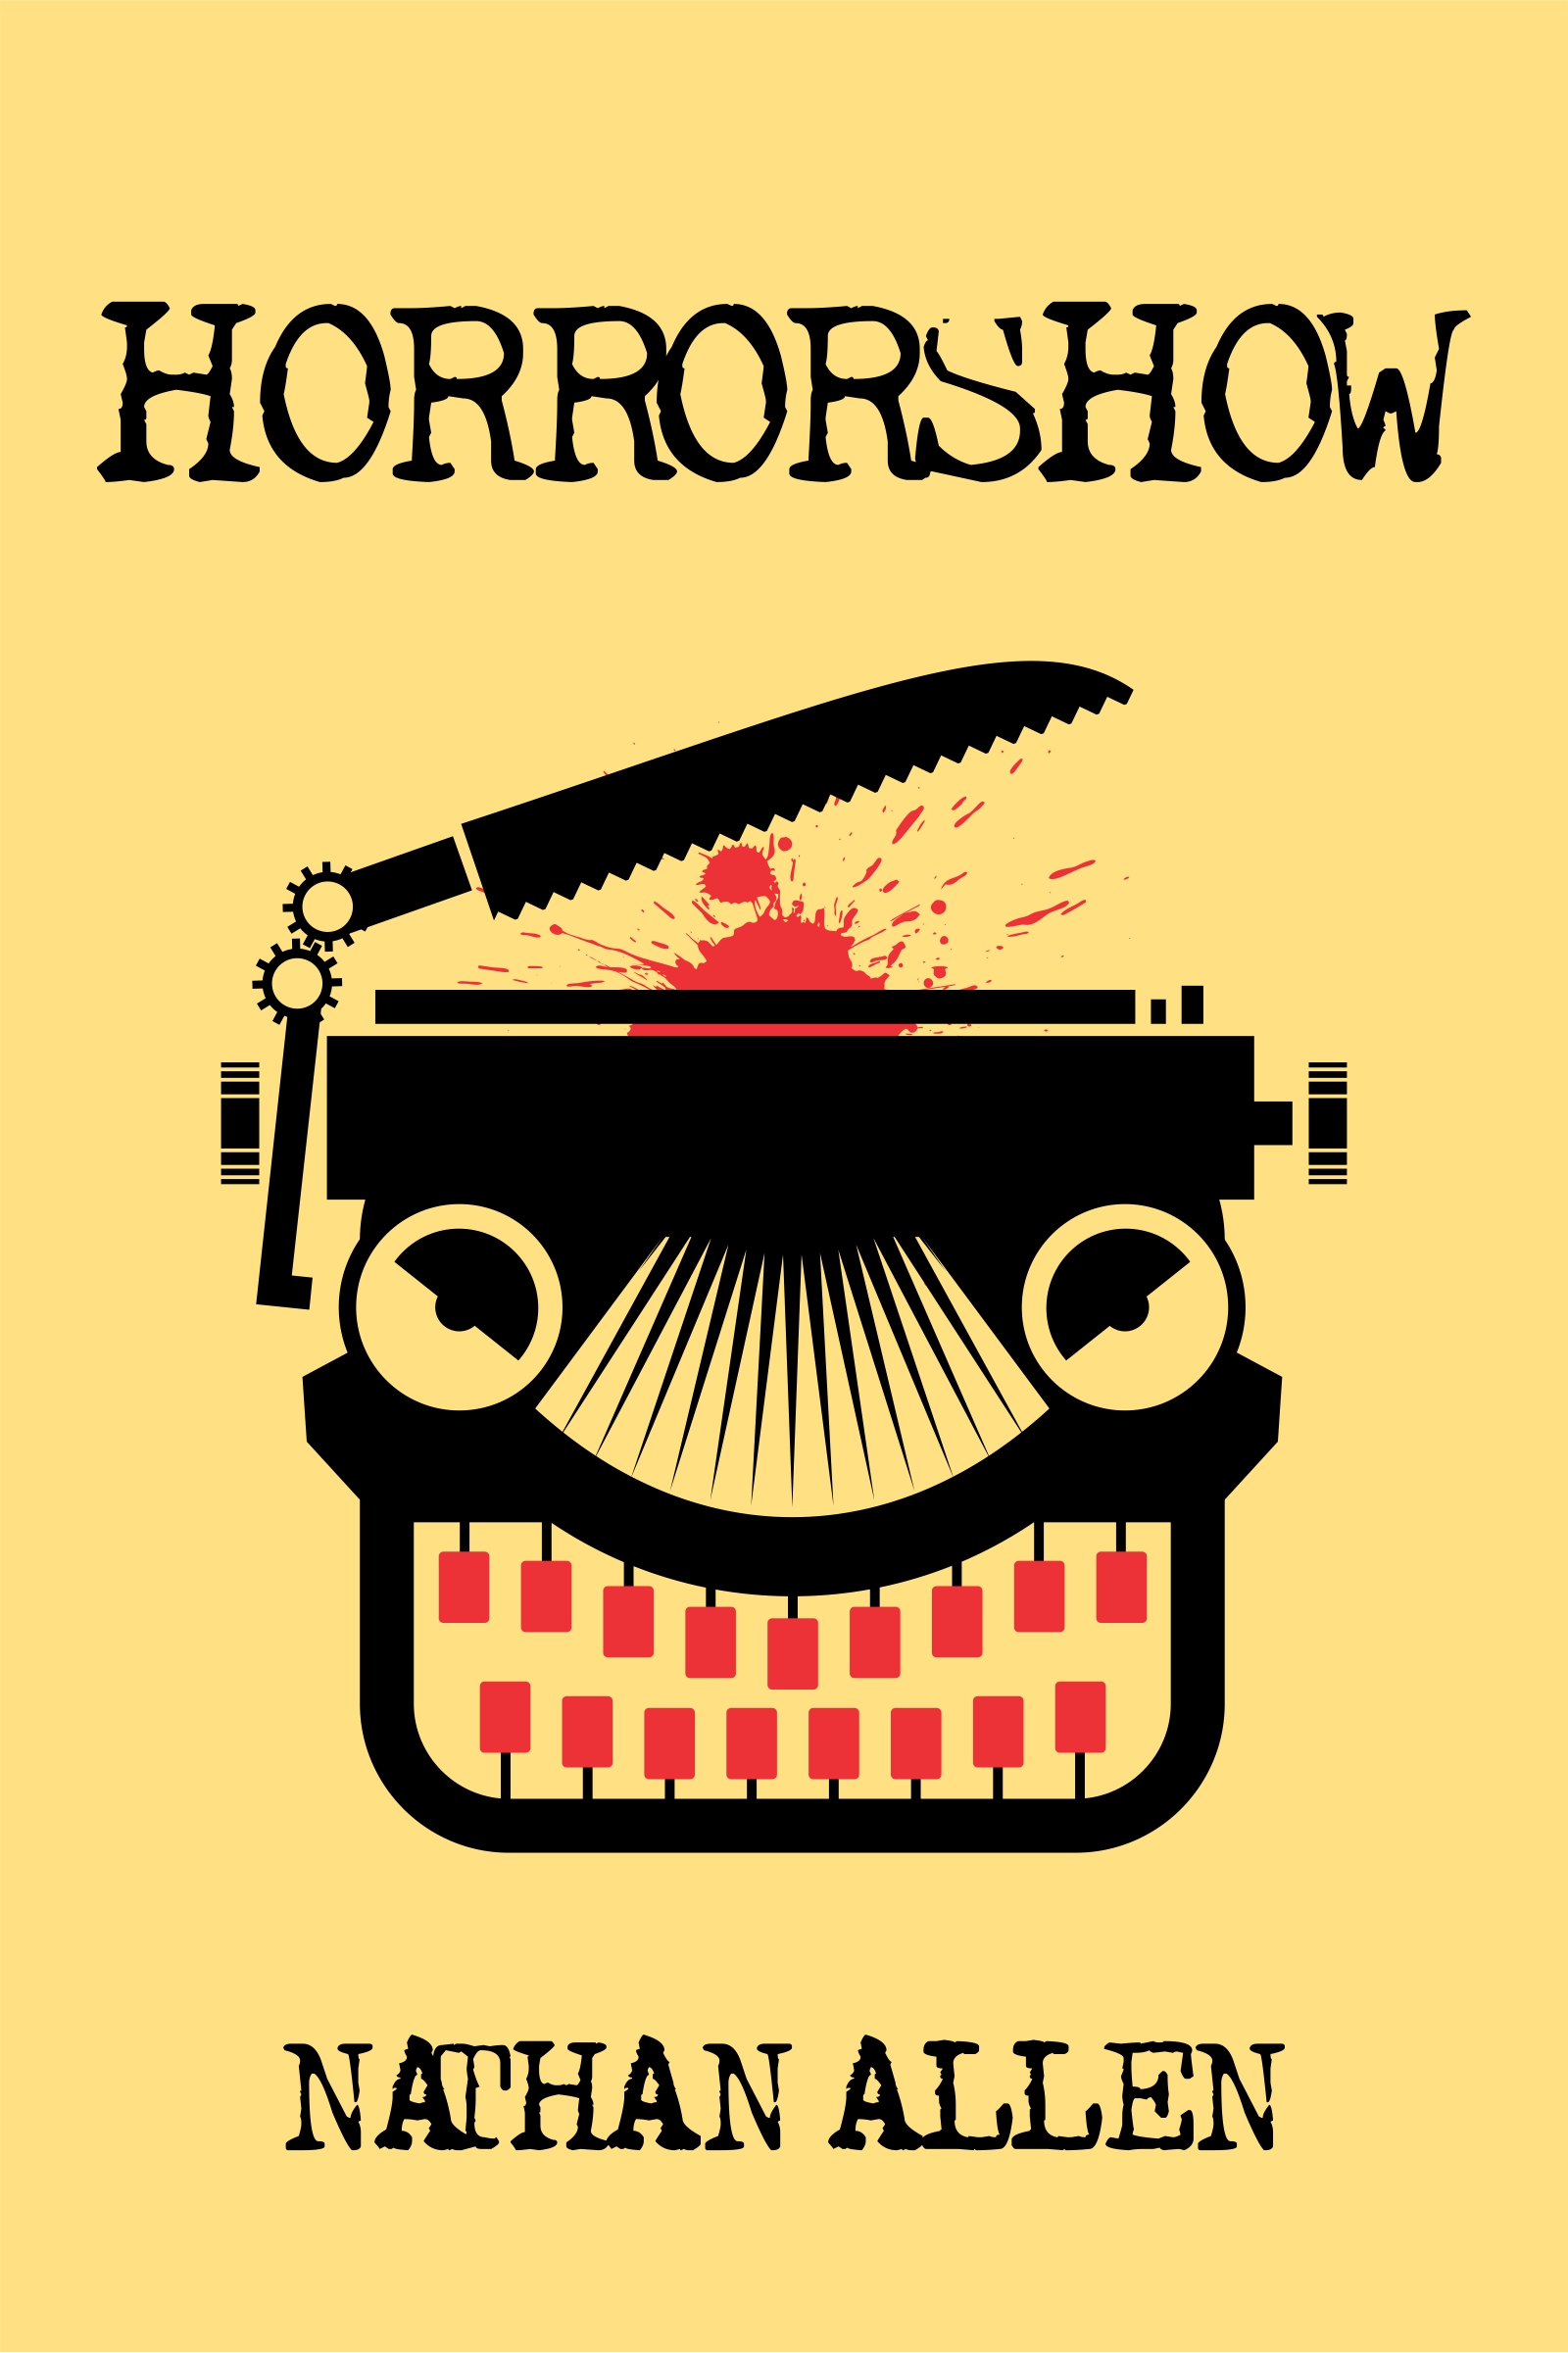 FREE: Horrorshow by Nathan Allen